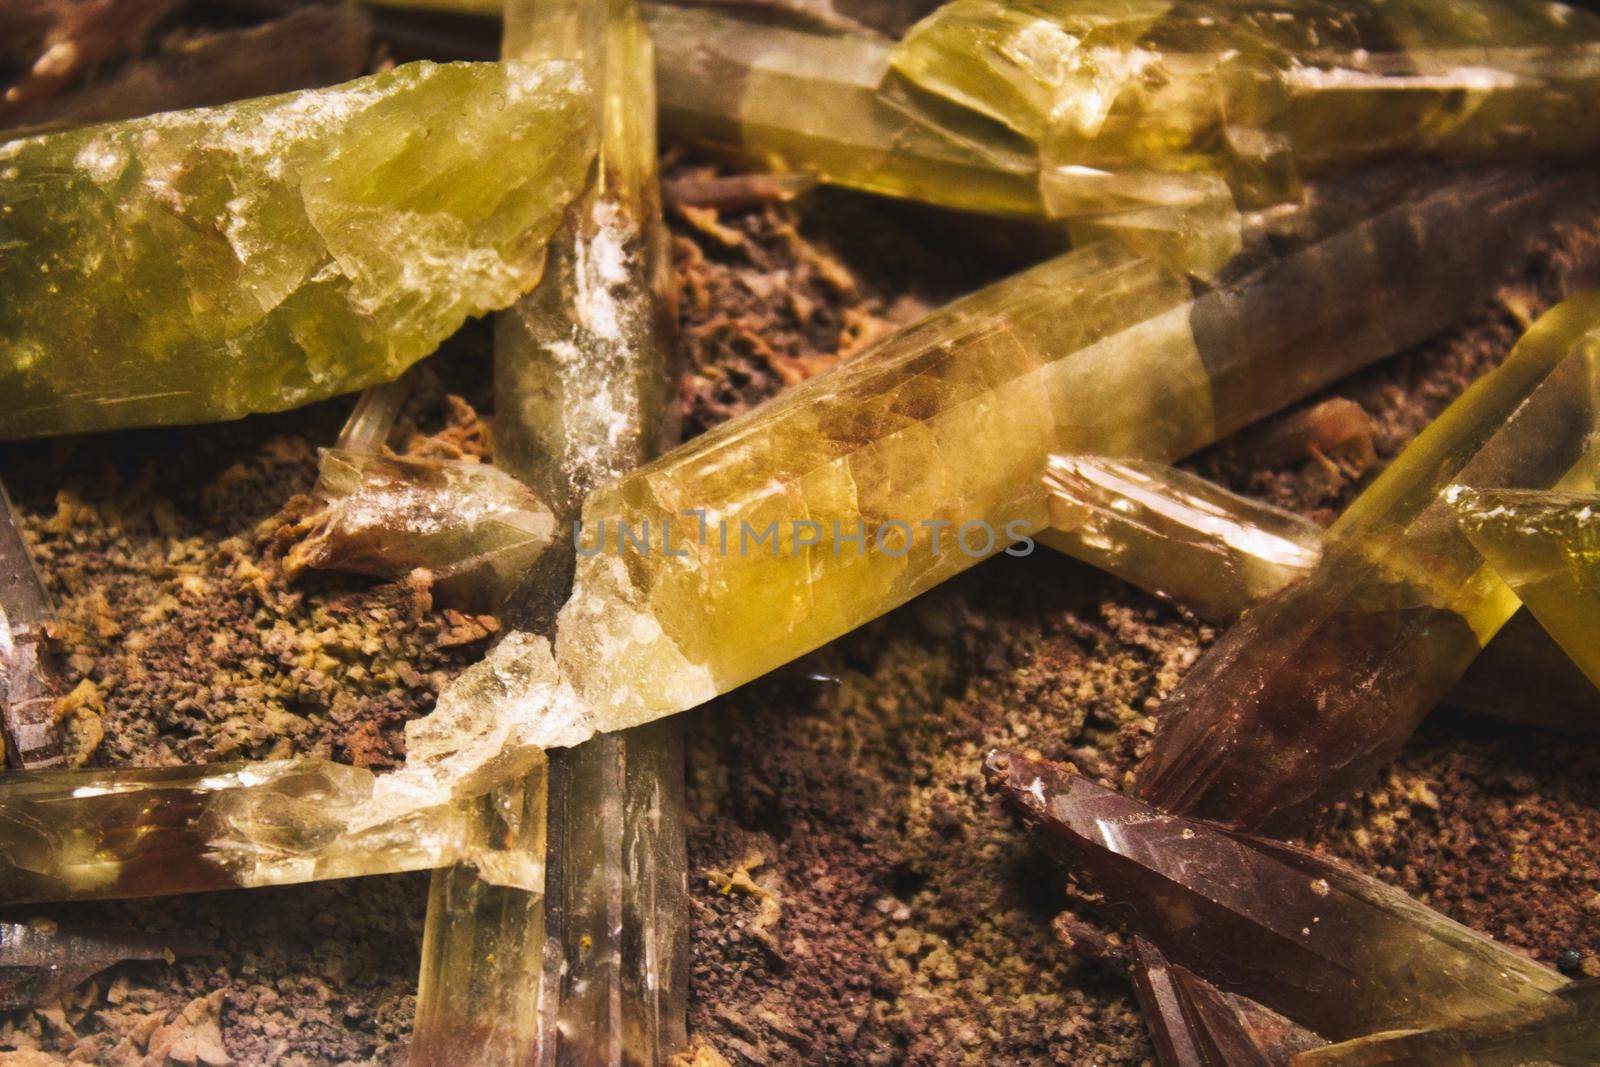 Yellow and brown quartz crystal shards embedded in mineral rock